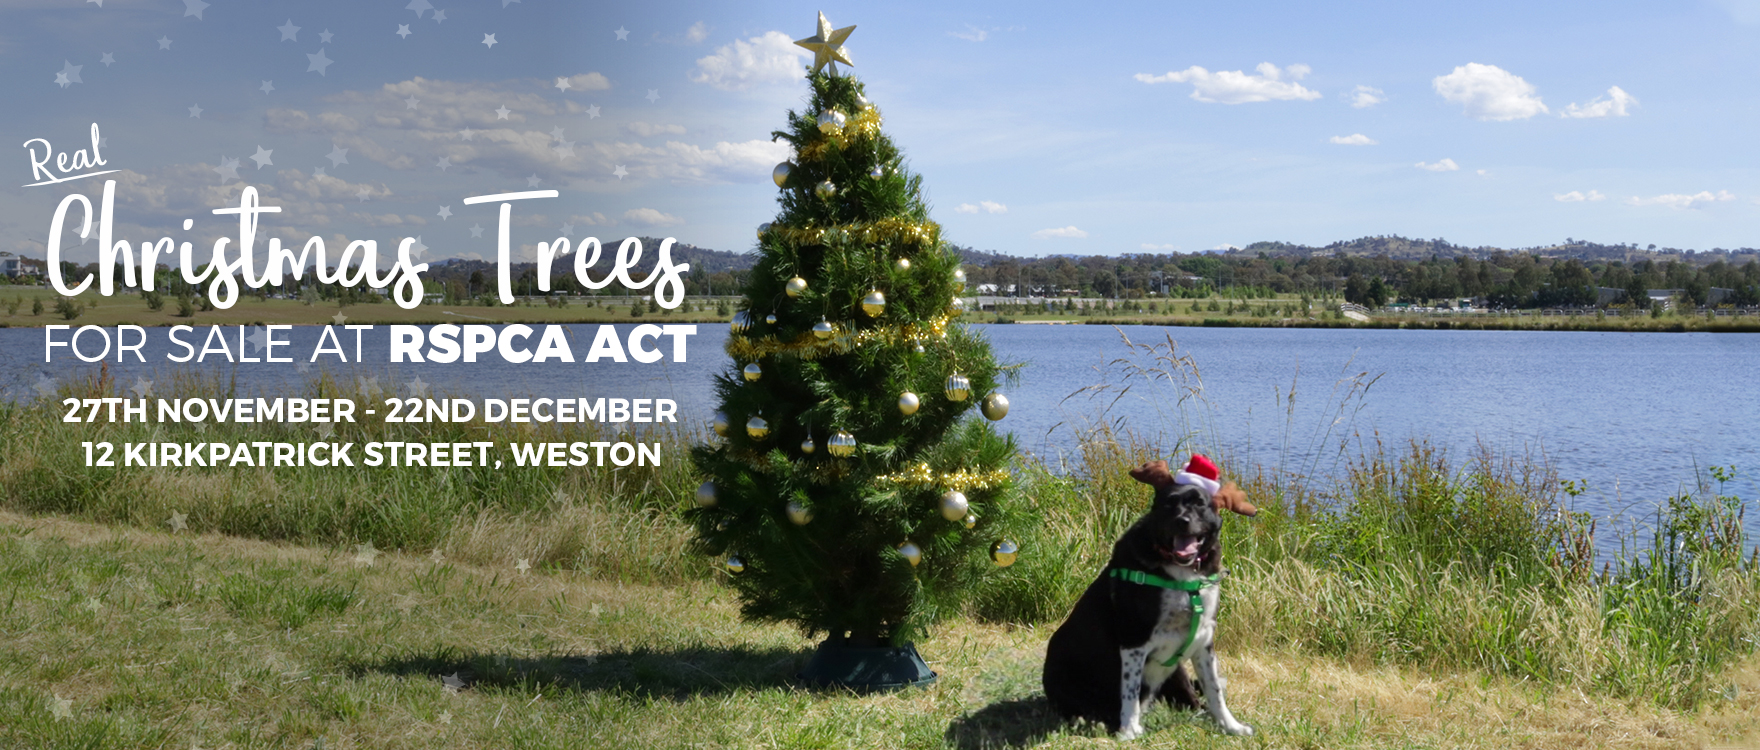 Christmas Trees for sale at RSPCA ACT